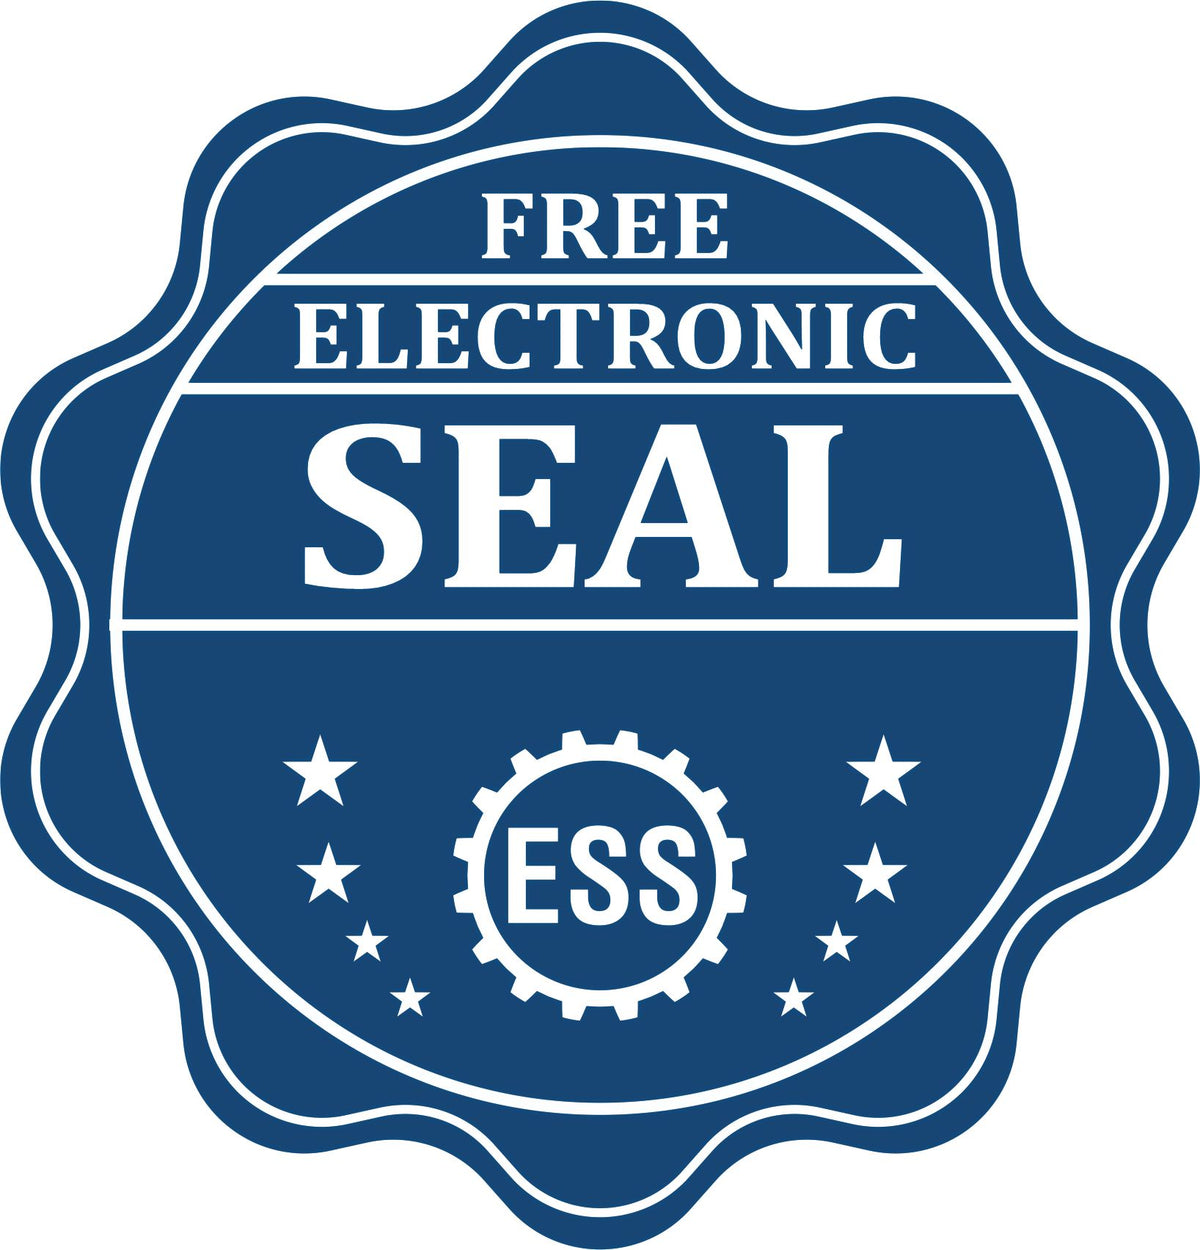 A badge showing a free electronic seal for the Hybrid Texas Landscape Architect Seal with stars and the ESS gear on the emblem.